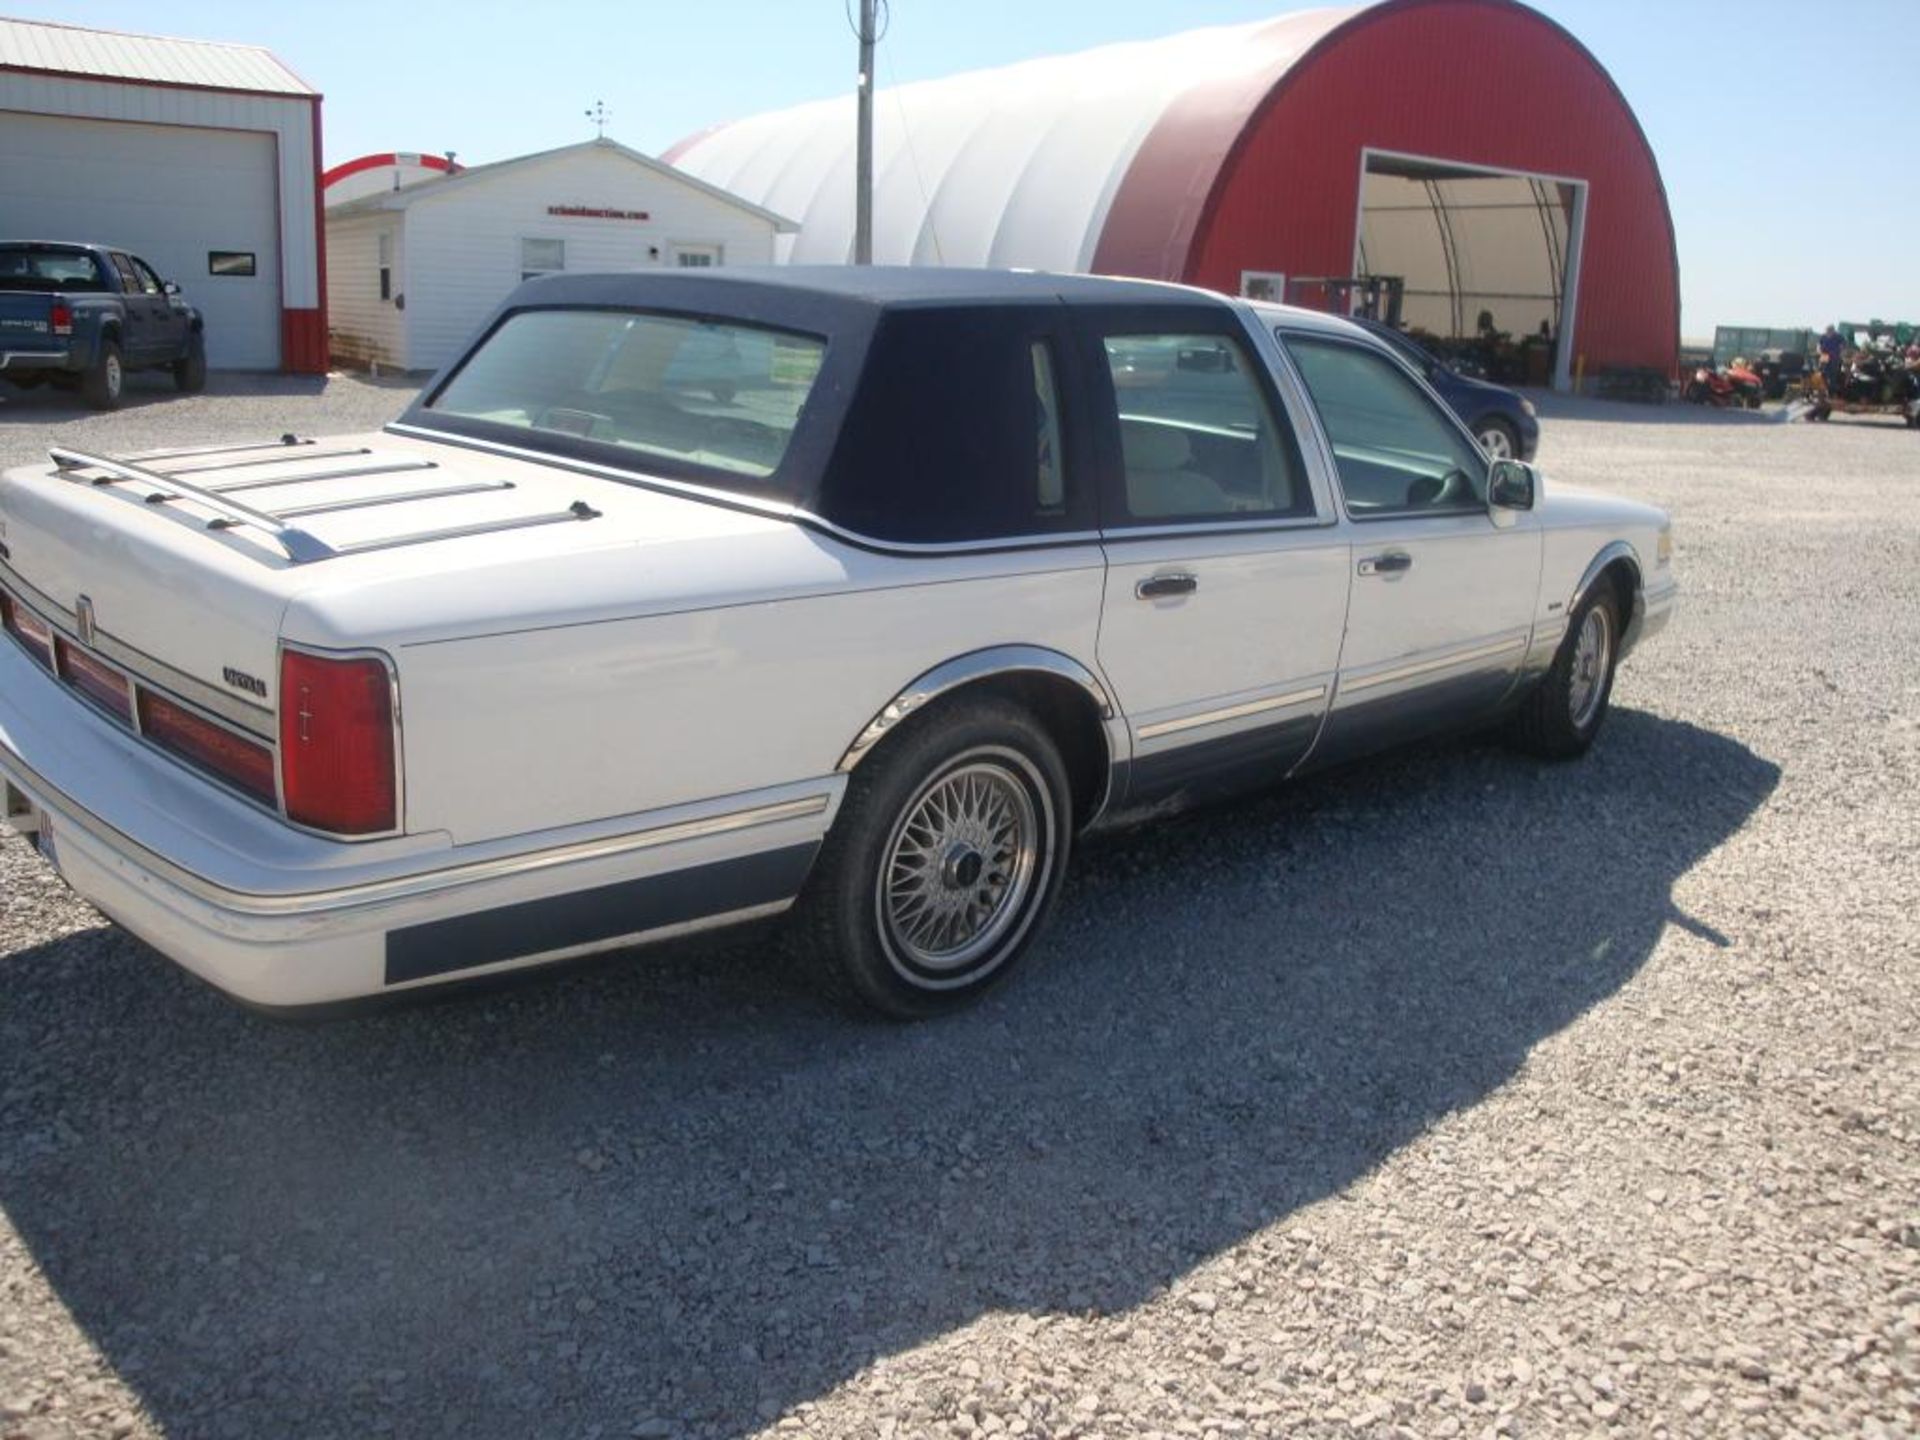 (Title) 1995 Lincoln Towncar,approx. 238,000 miles, Caution-soft brakes, otherwise no issues - Image 8 of 12